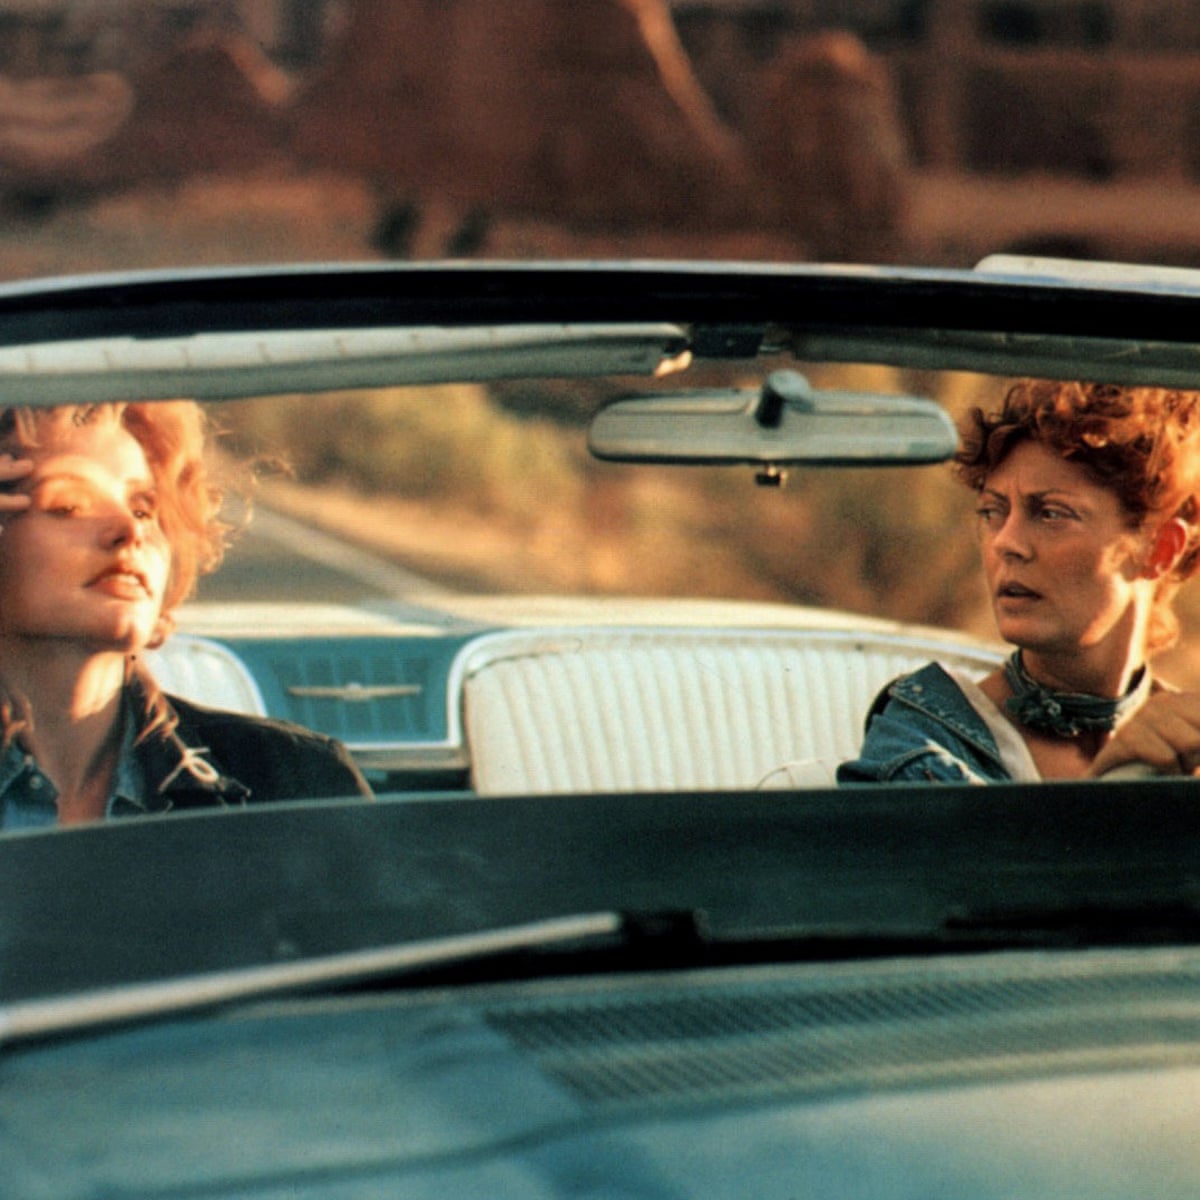 Thelma and Louise Review